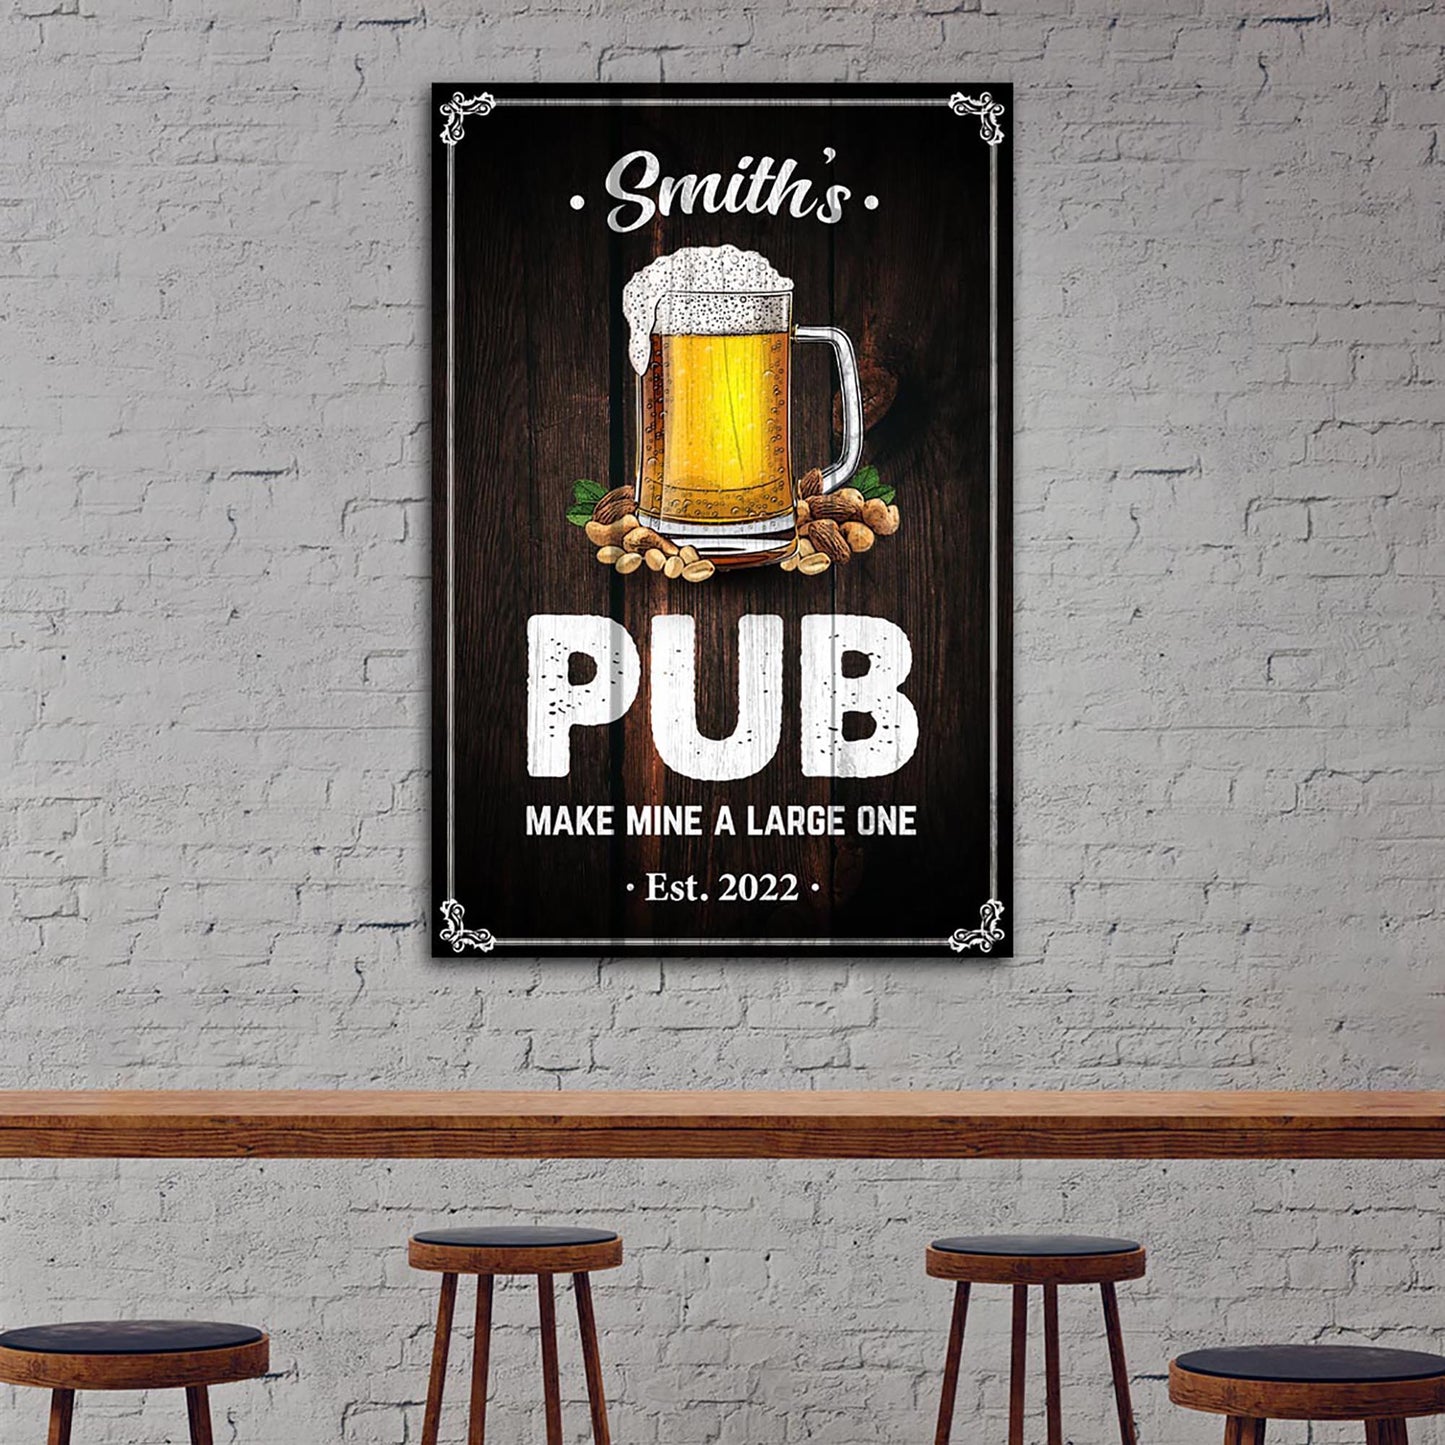 Make Mine A Large One Pub Sign - Image by Tailored Canvases